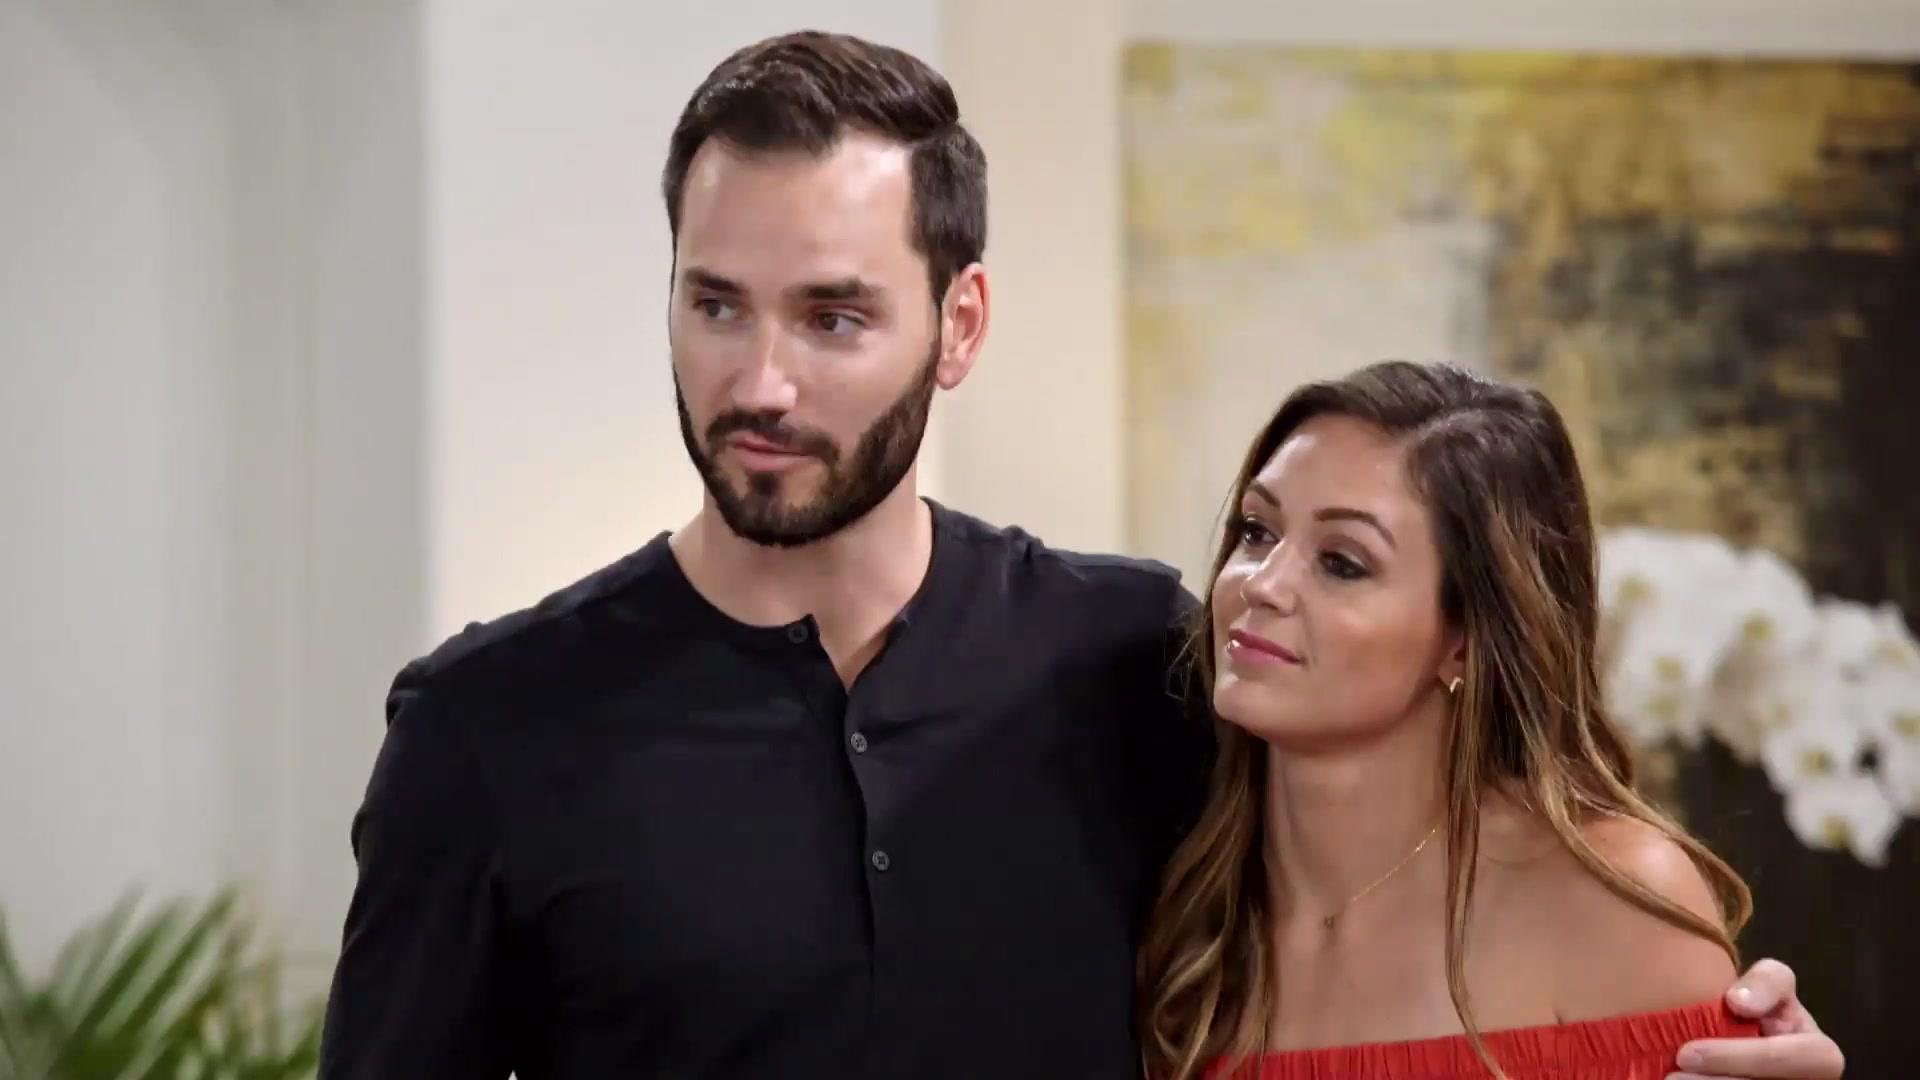 Sneak Peek: Is It The End for Chris and Desiree?